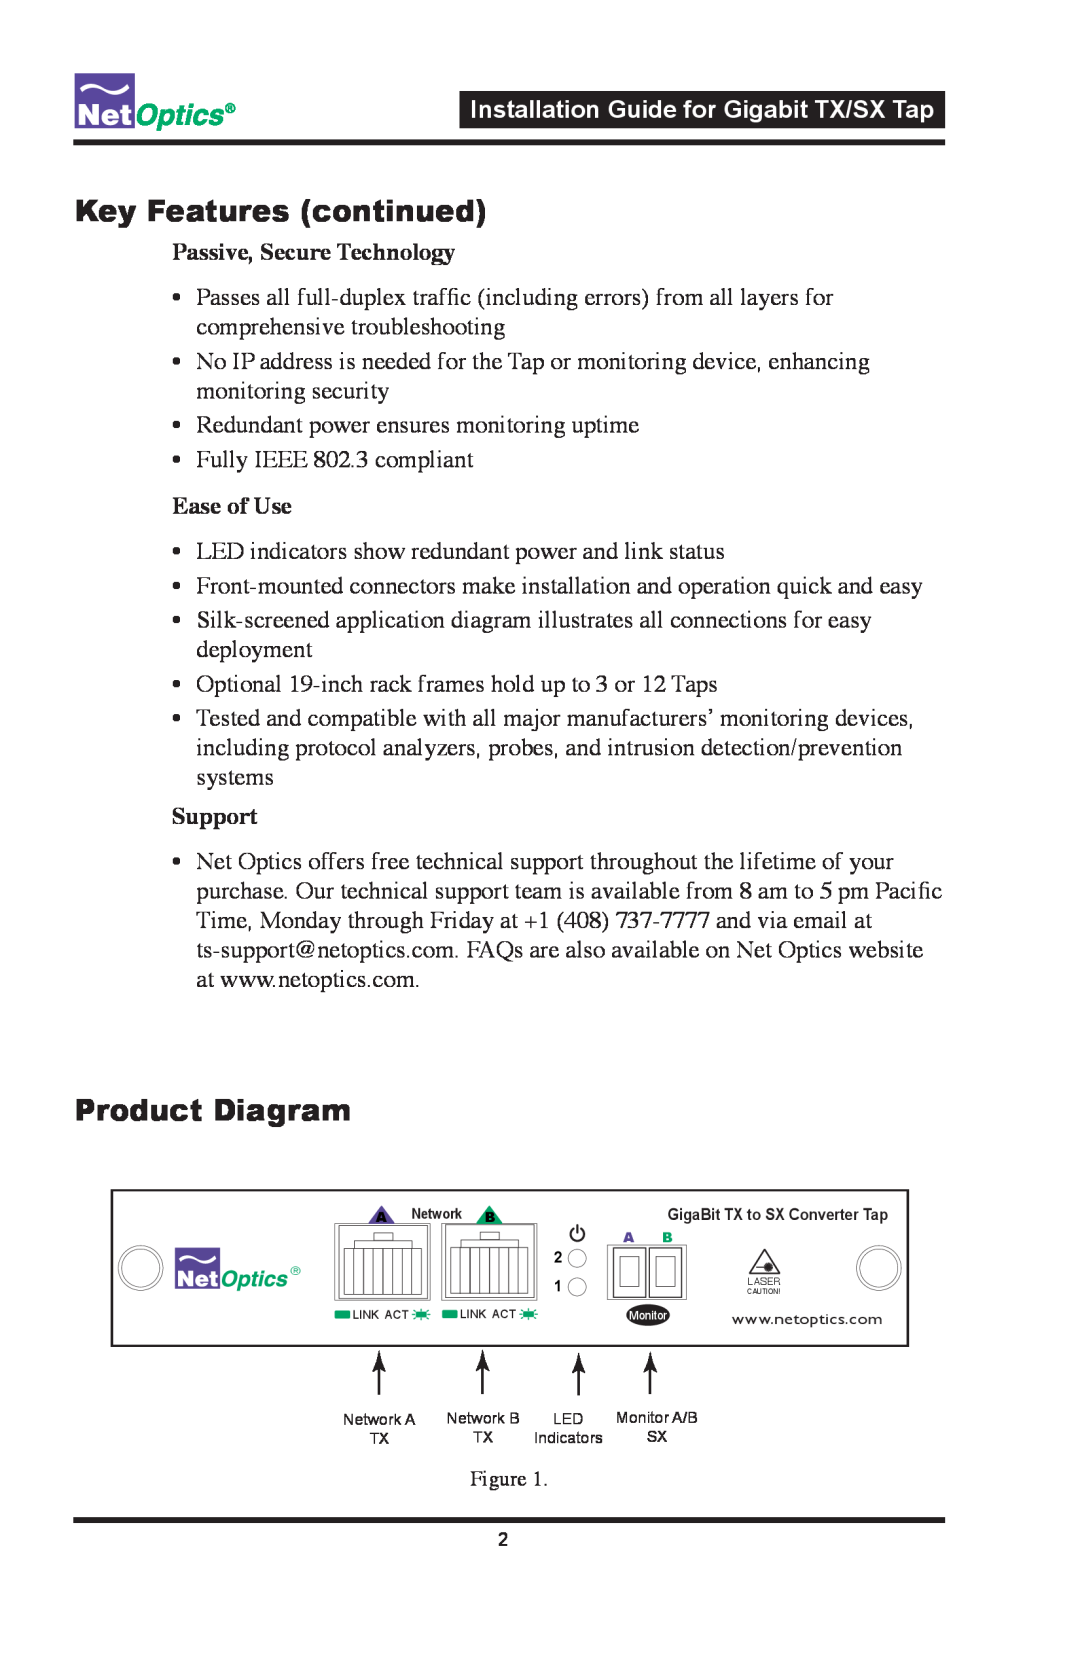 Nokia CVT-GCU/SX Key Features continued, Product Diagram, Ease of Use, Support, Installation Guide for Gigabit TX/SX Tap 